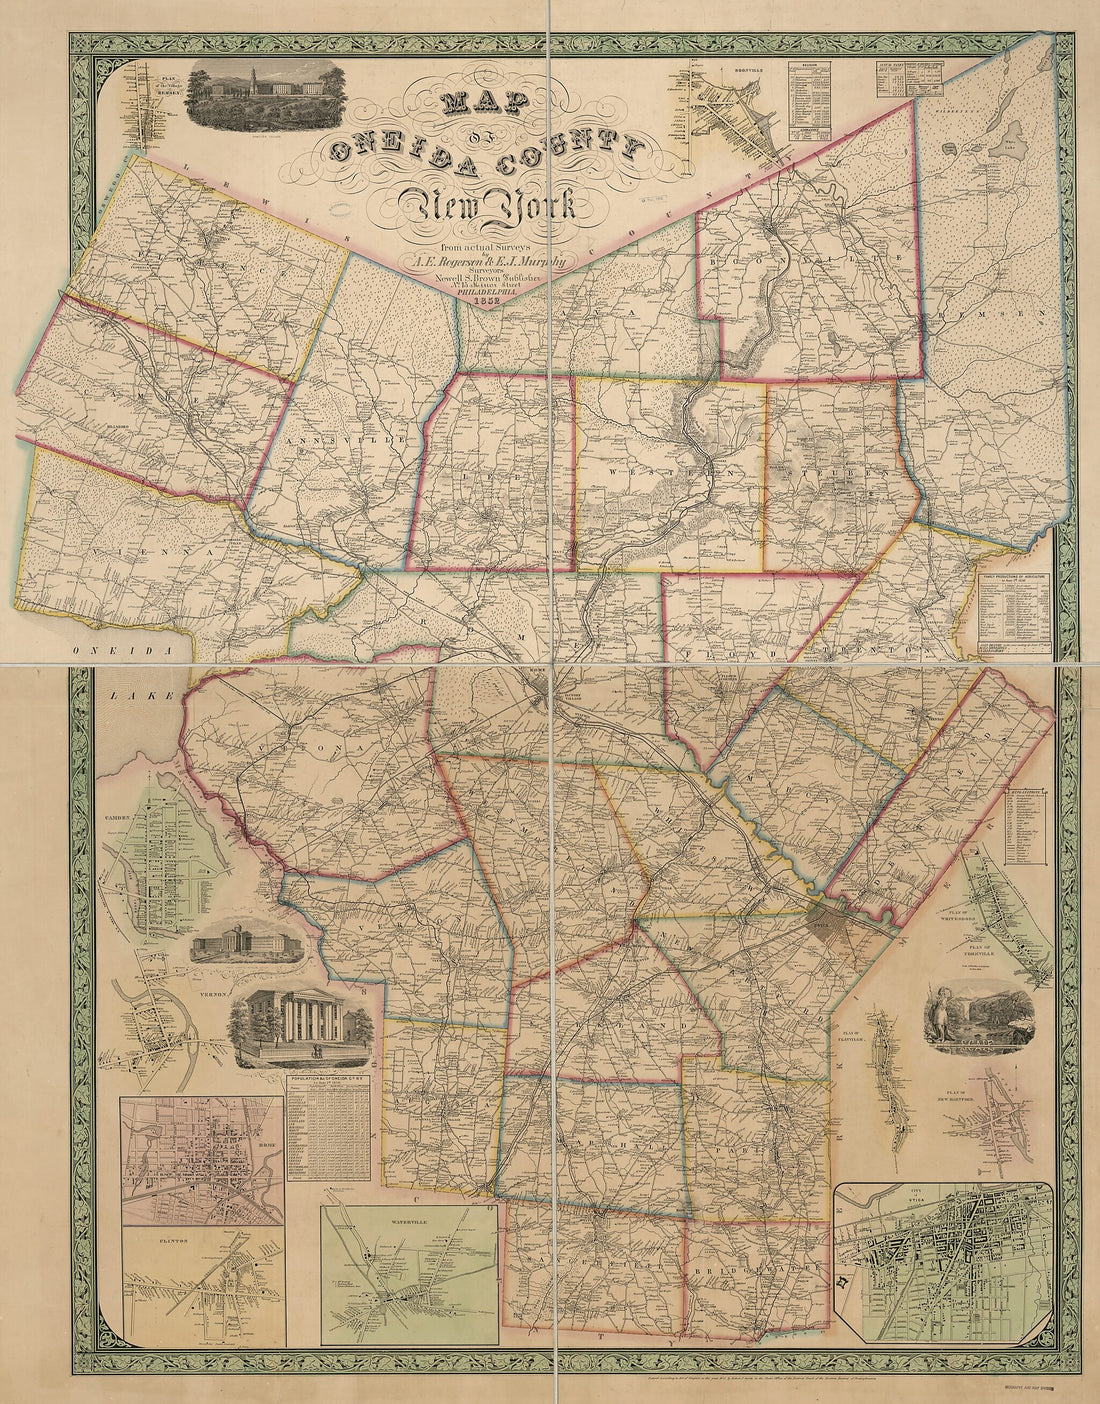 This old map of Map of Oneida County, New York : from Actual Surveys from 1852 was created by E. J. Murphy, A. E. (Andrew E.) Rogerson, Robert Pearsall Smith in 1852